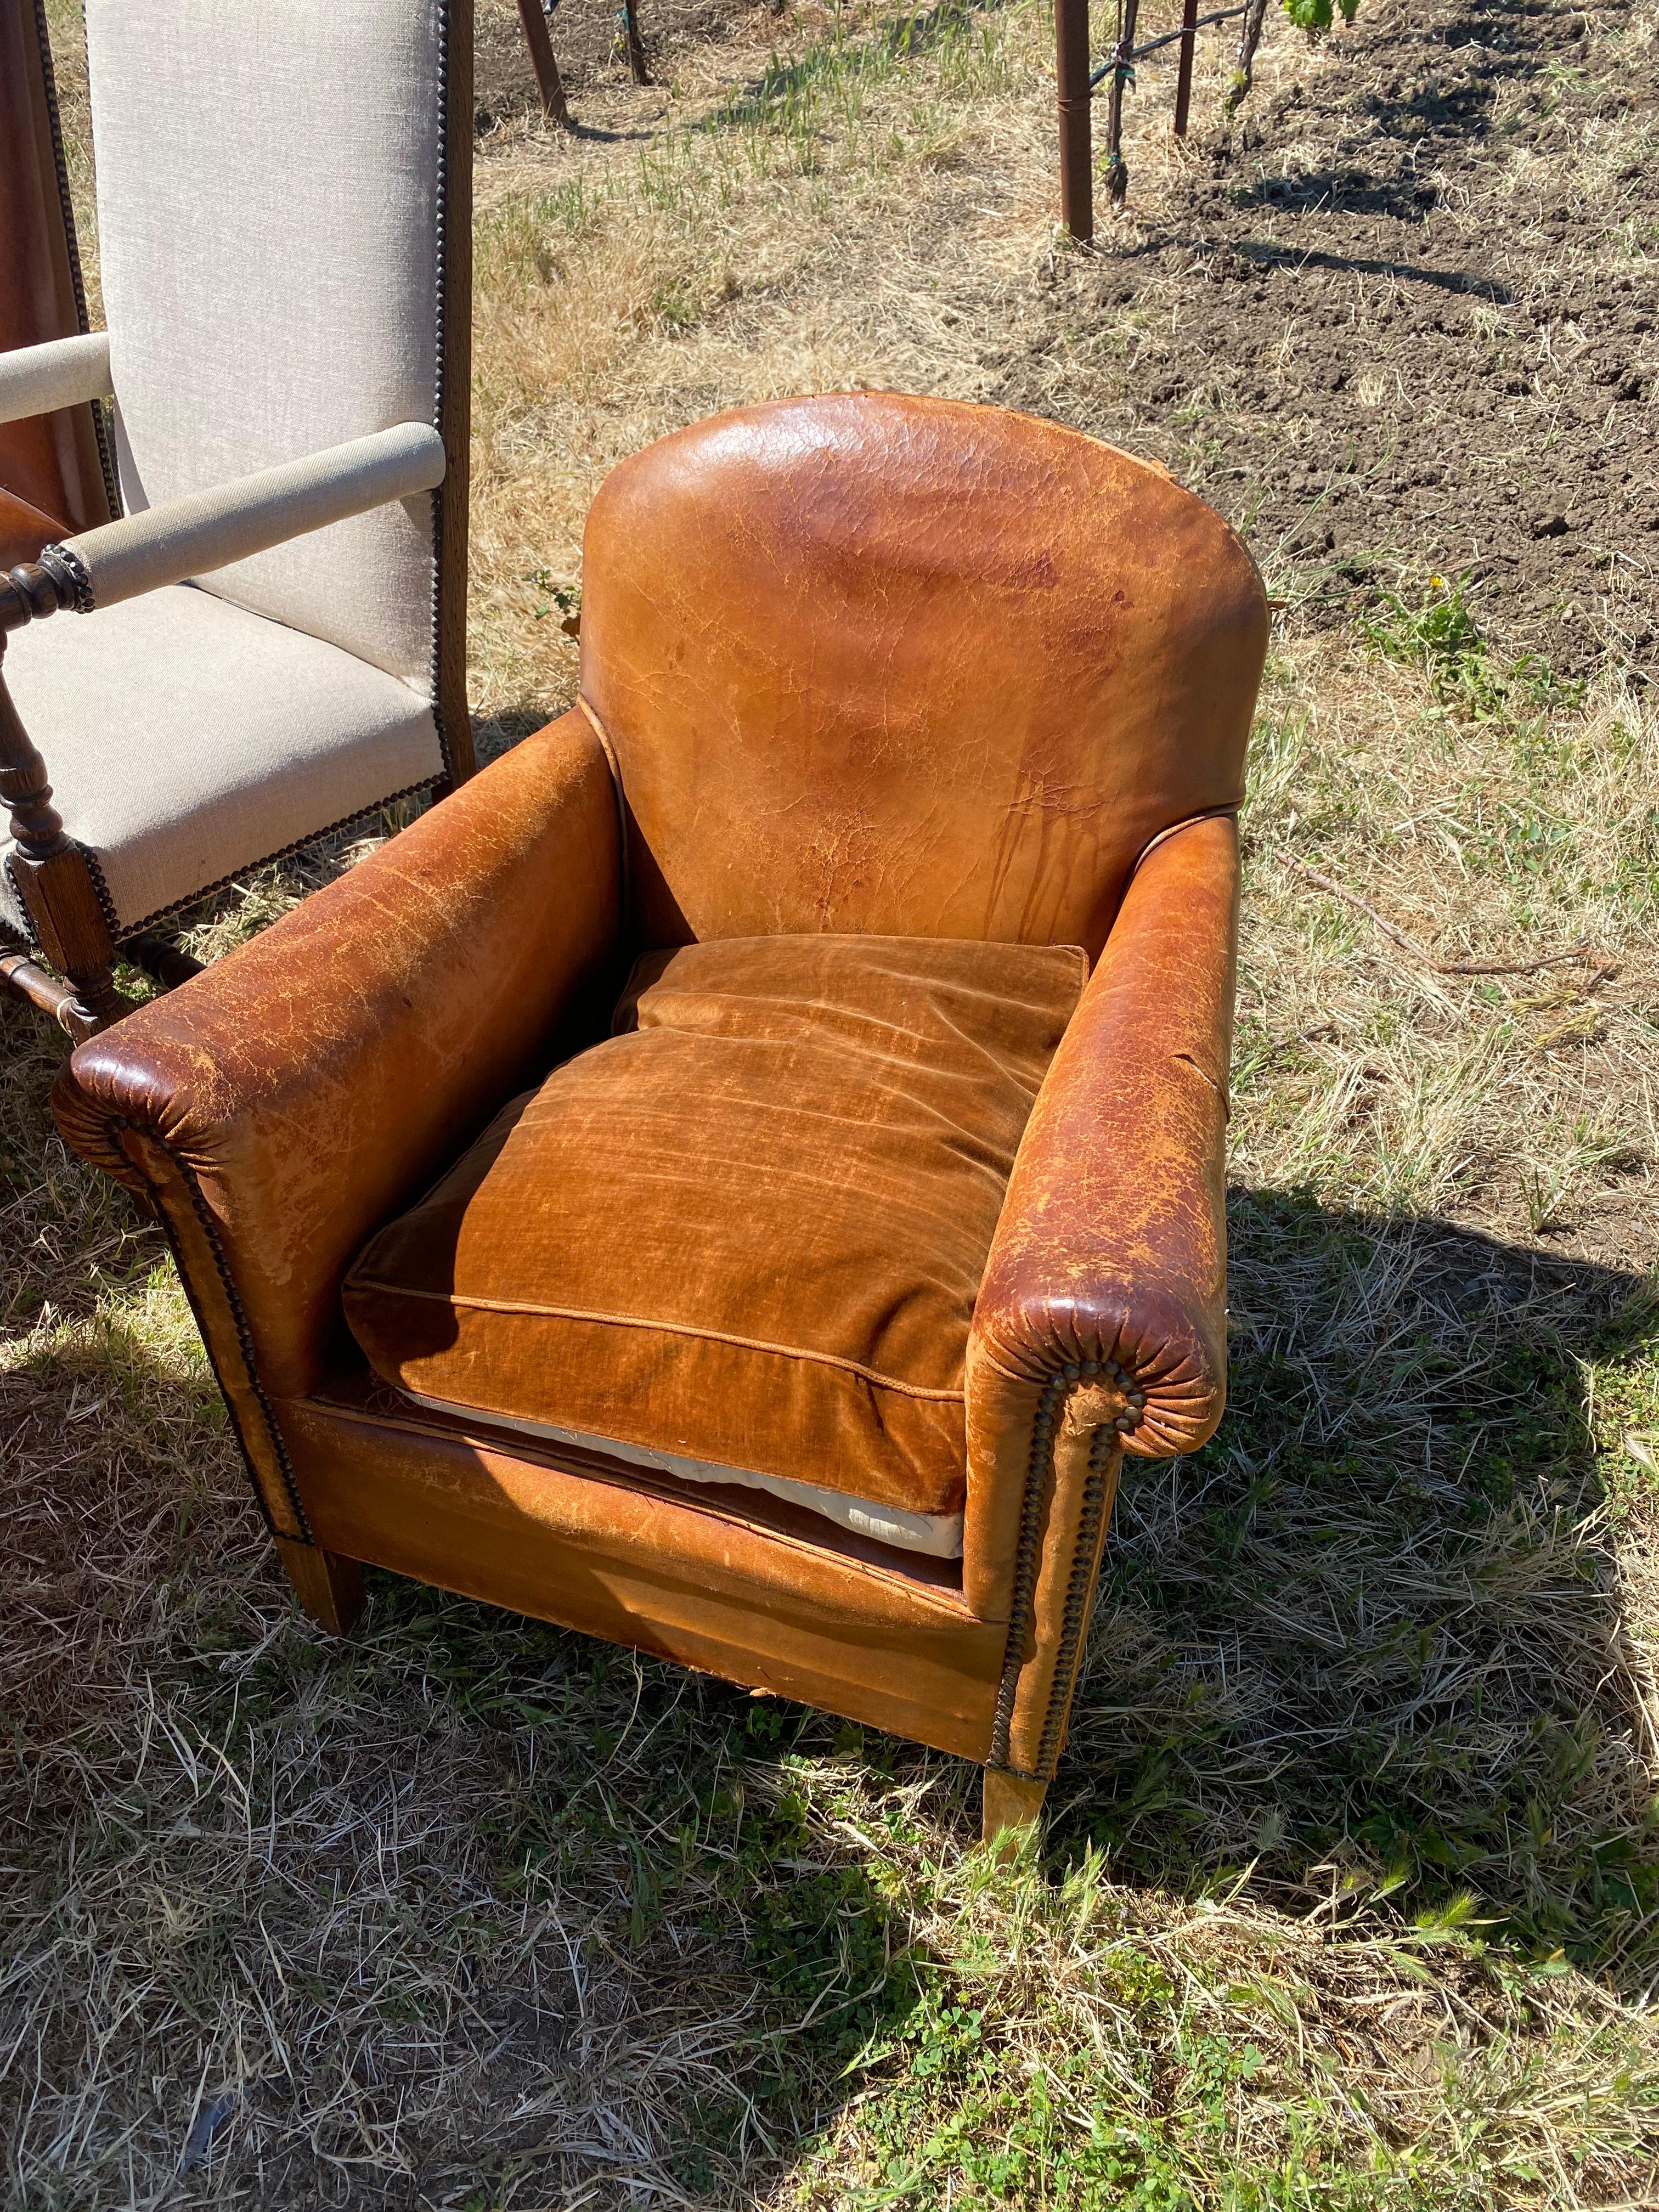 Vintage Restoration Hardware Randolf Leather Chair In Good Condition For Sale In Napa, CA